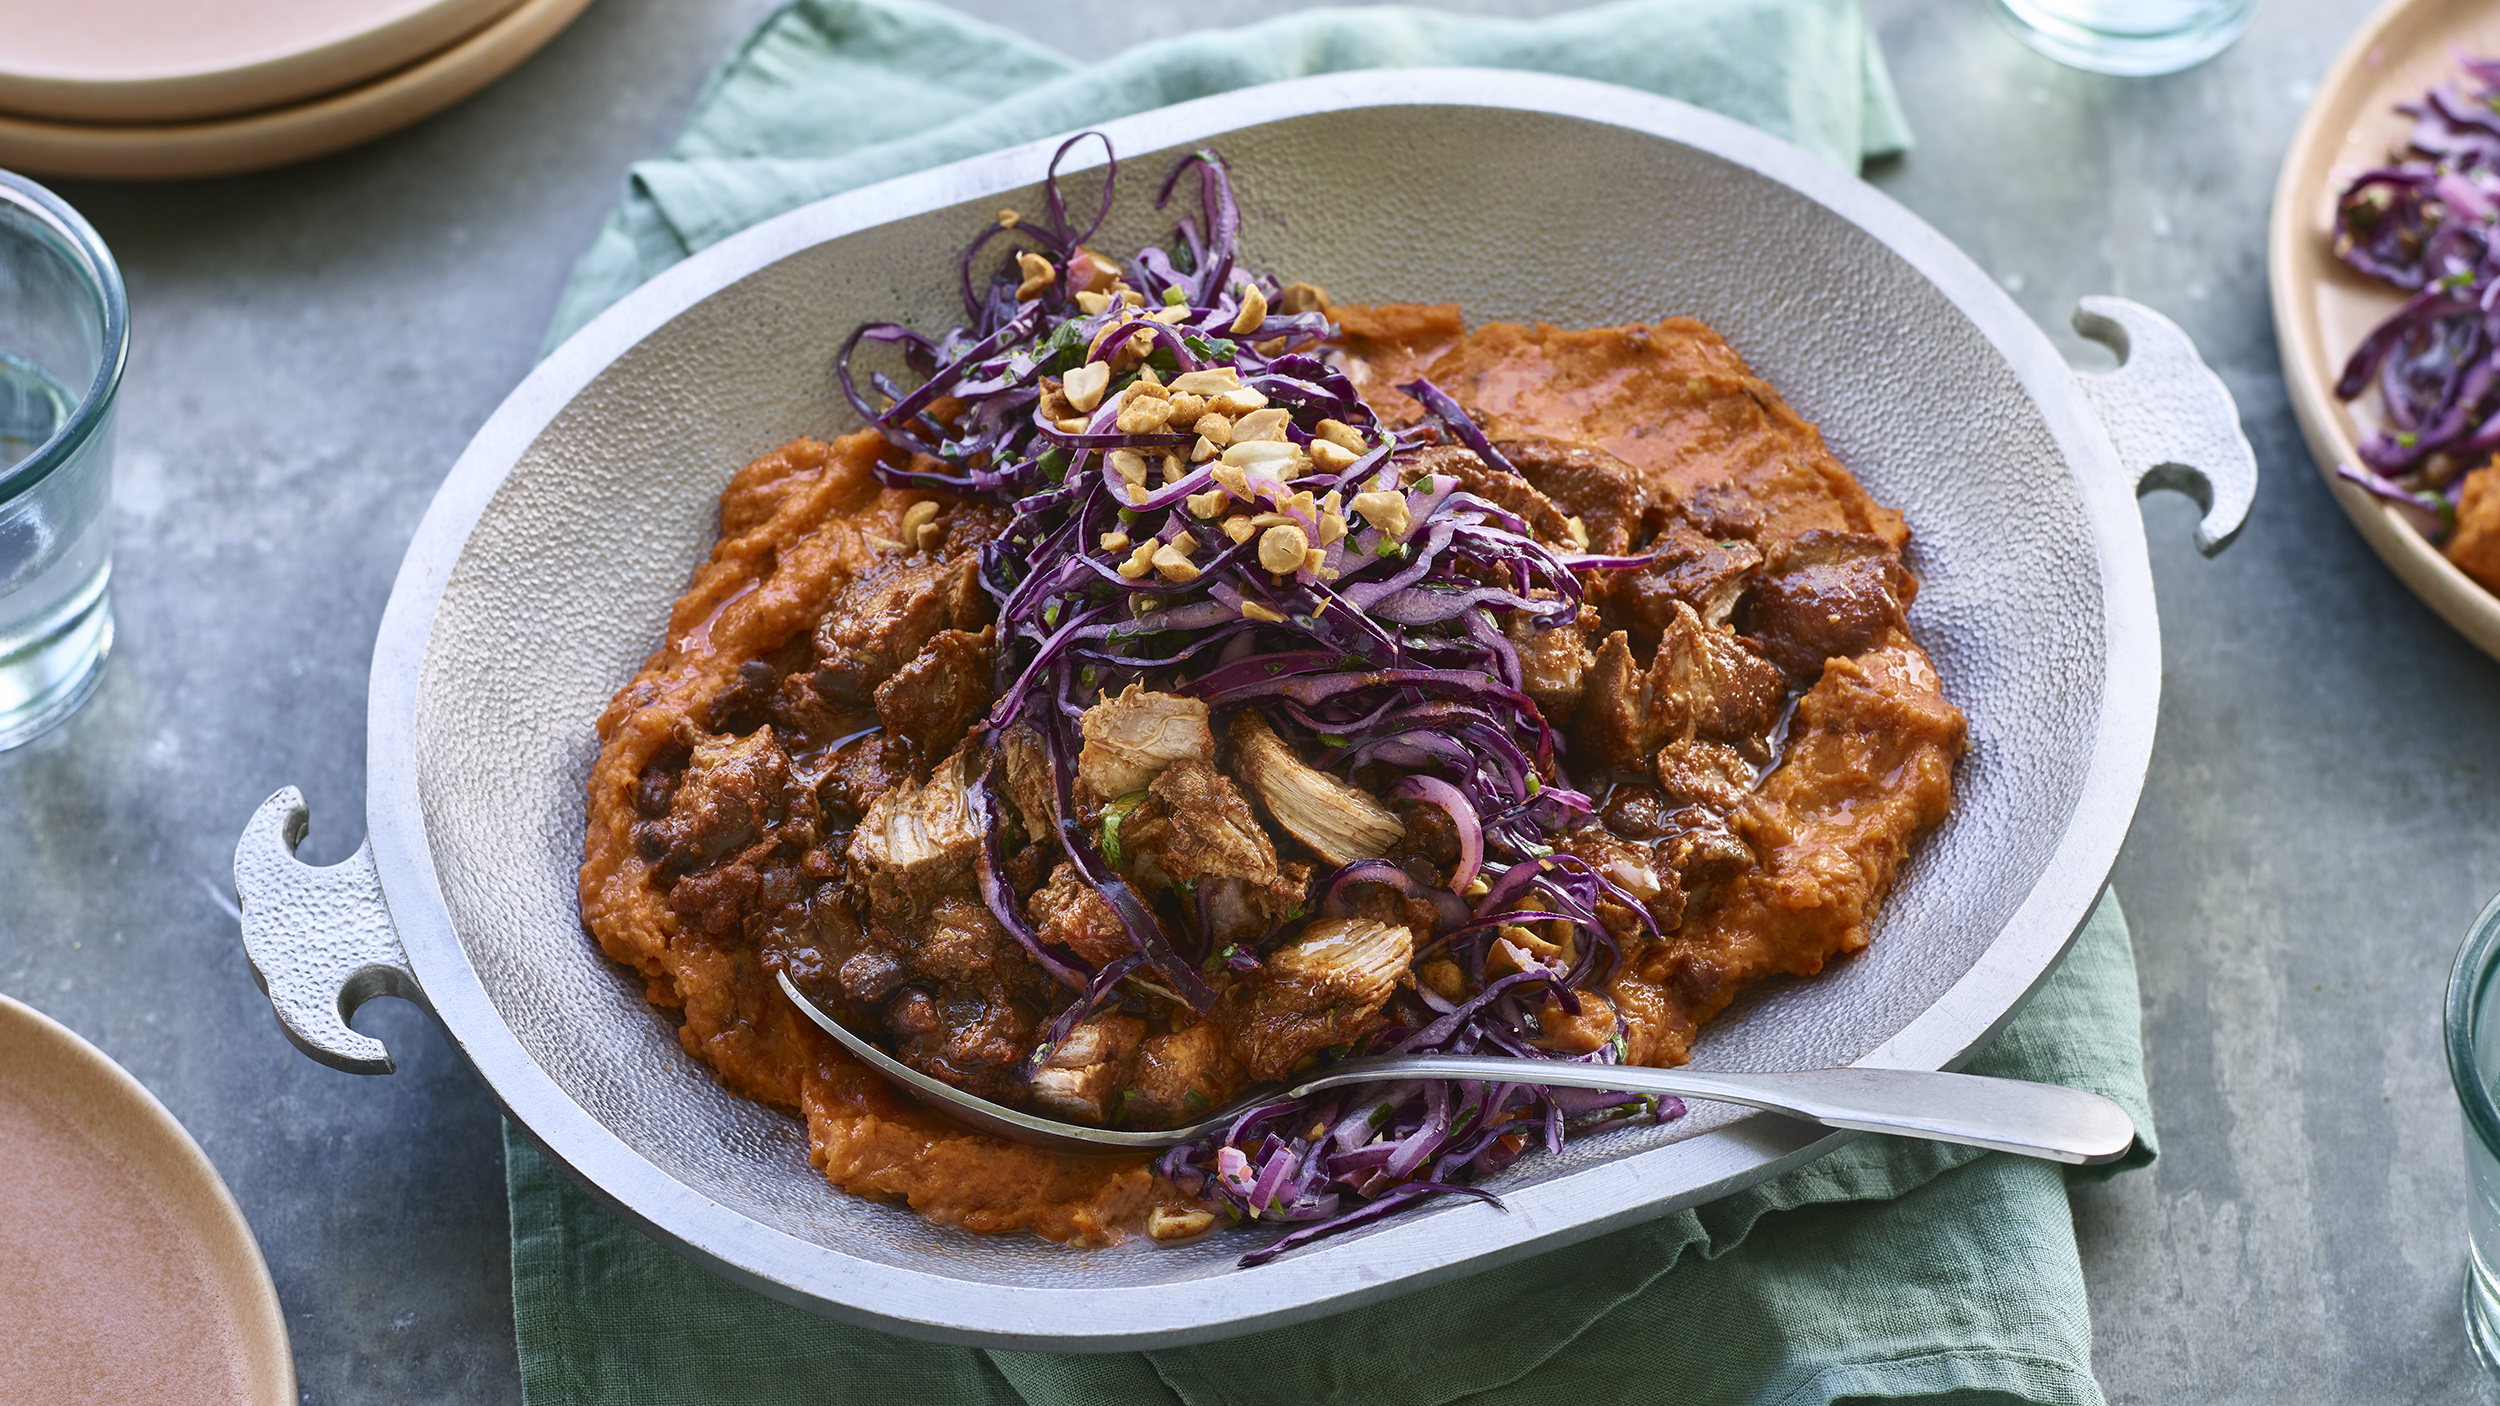 https://food-images.files.bbci.co.uk/food/recipes/spiced_pork_beans_11197_16x9.jpg